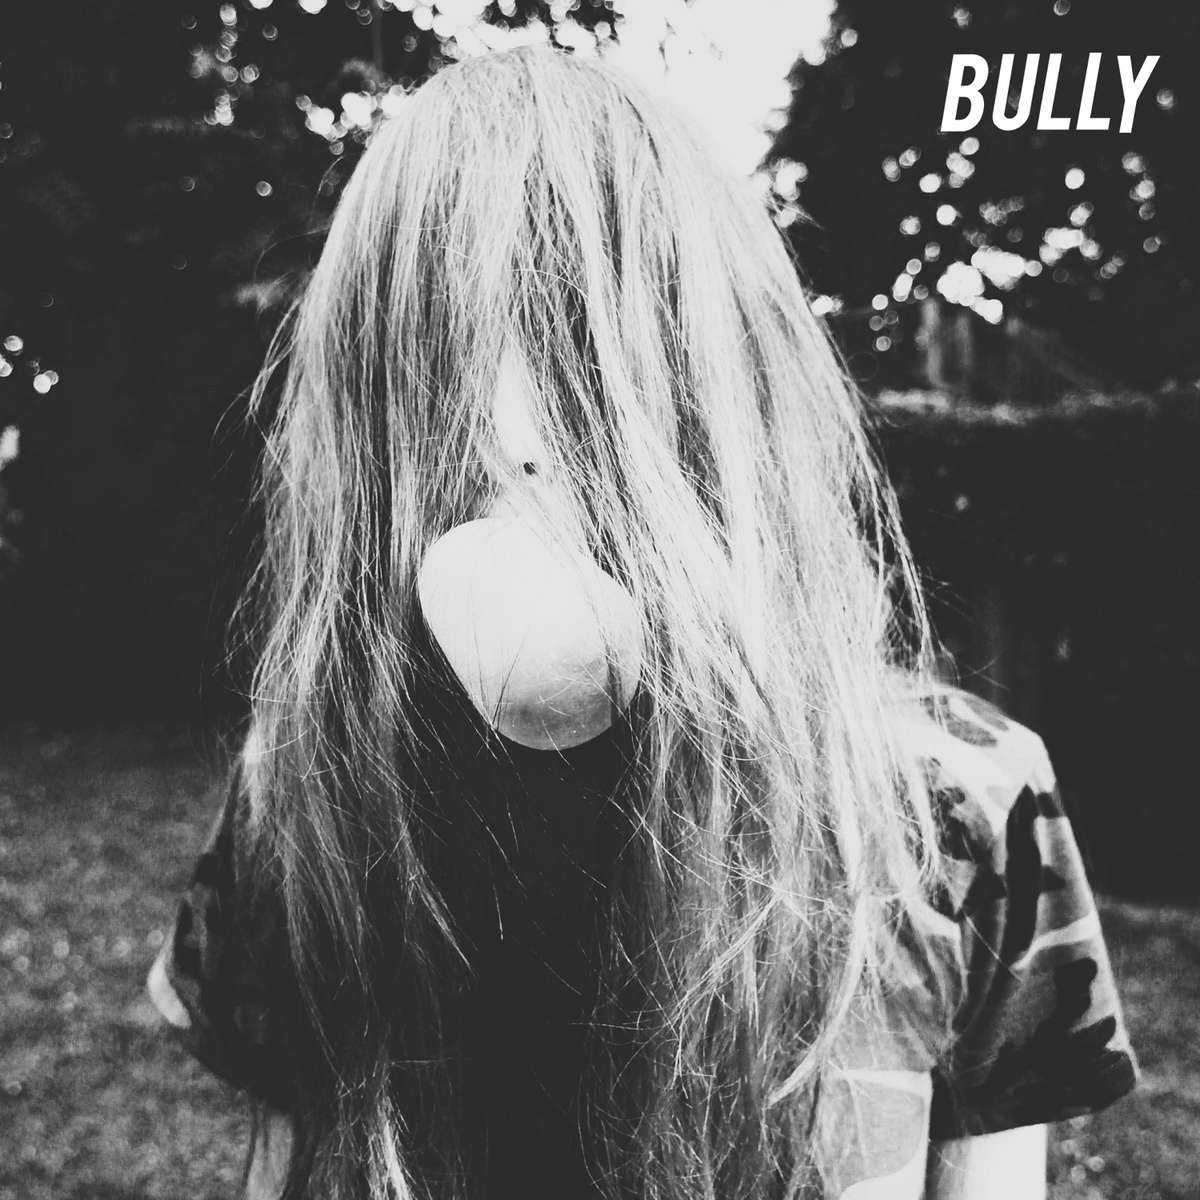 Bully's EP is out now.